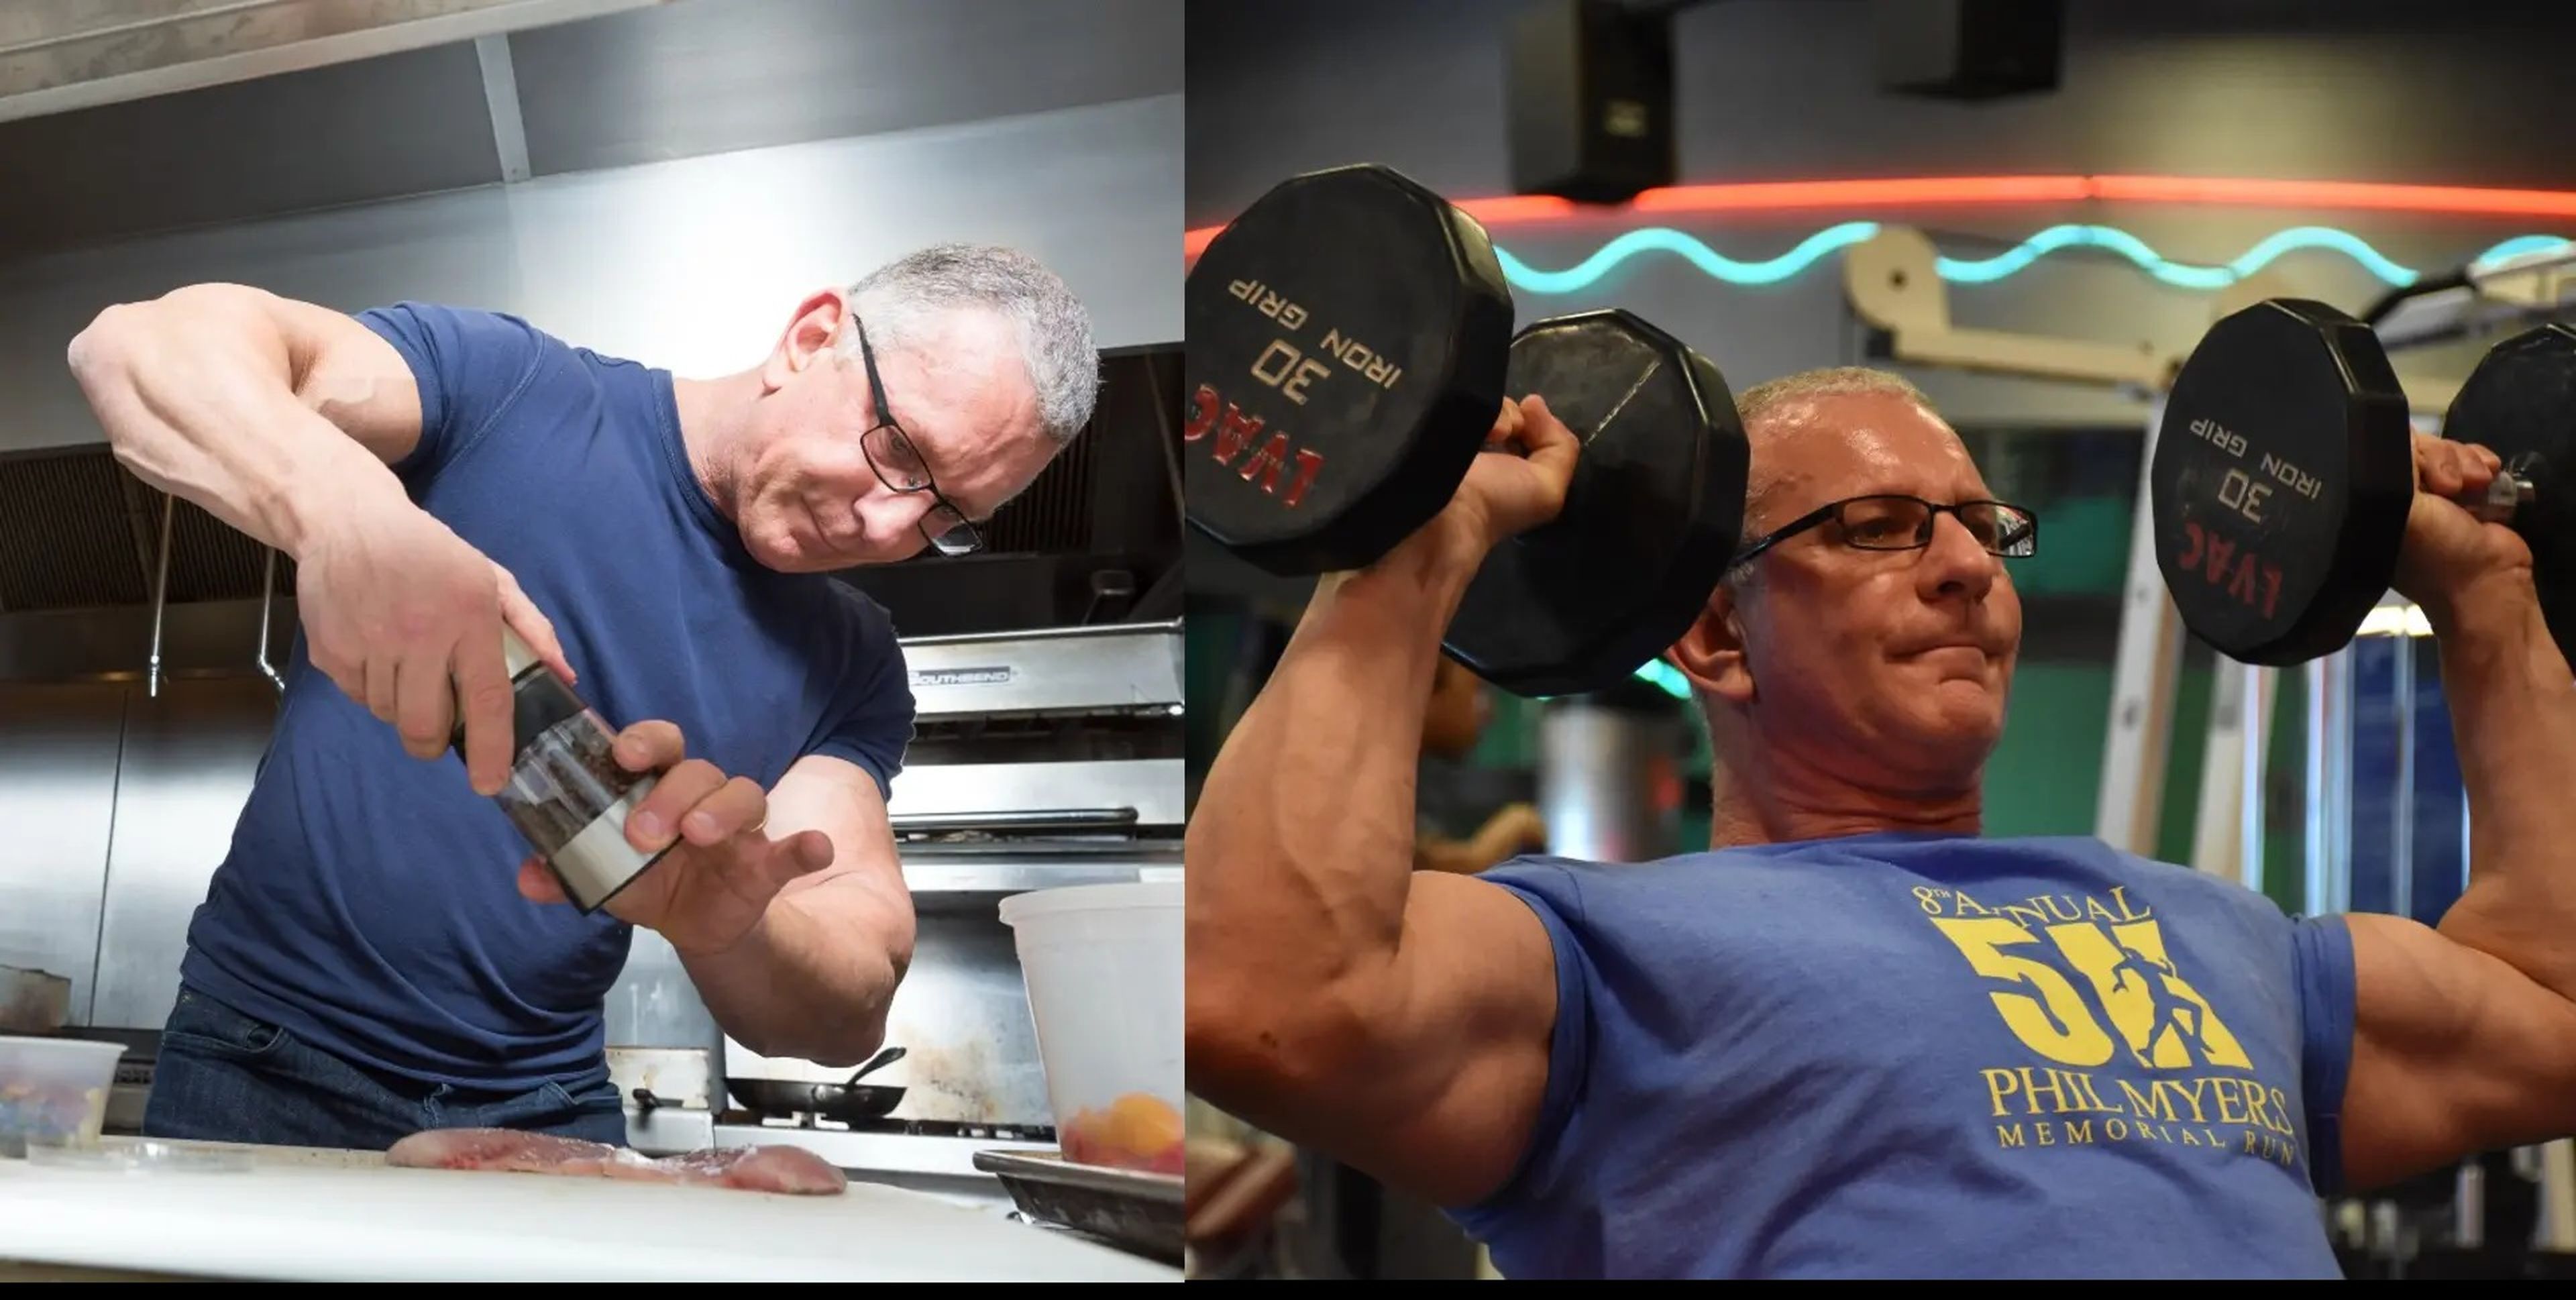 A split image showing Chef Robert Irvine cooking next to an image of him lifting weights.